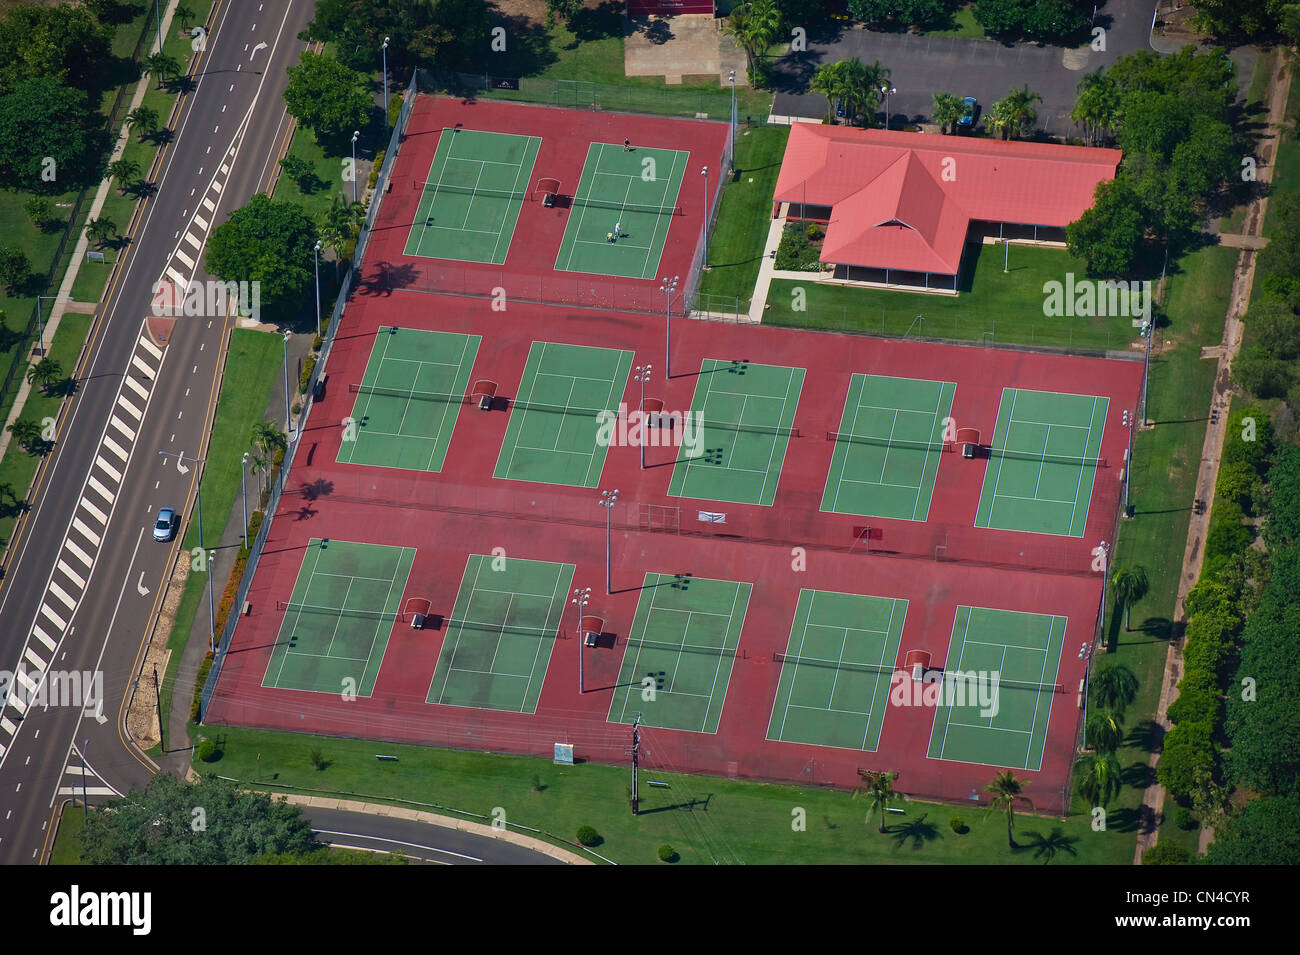 Australia, Northern Territory, Darwin, tennis court in the town center (aerial view) Stock Photo